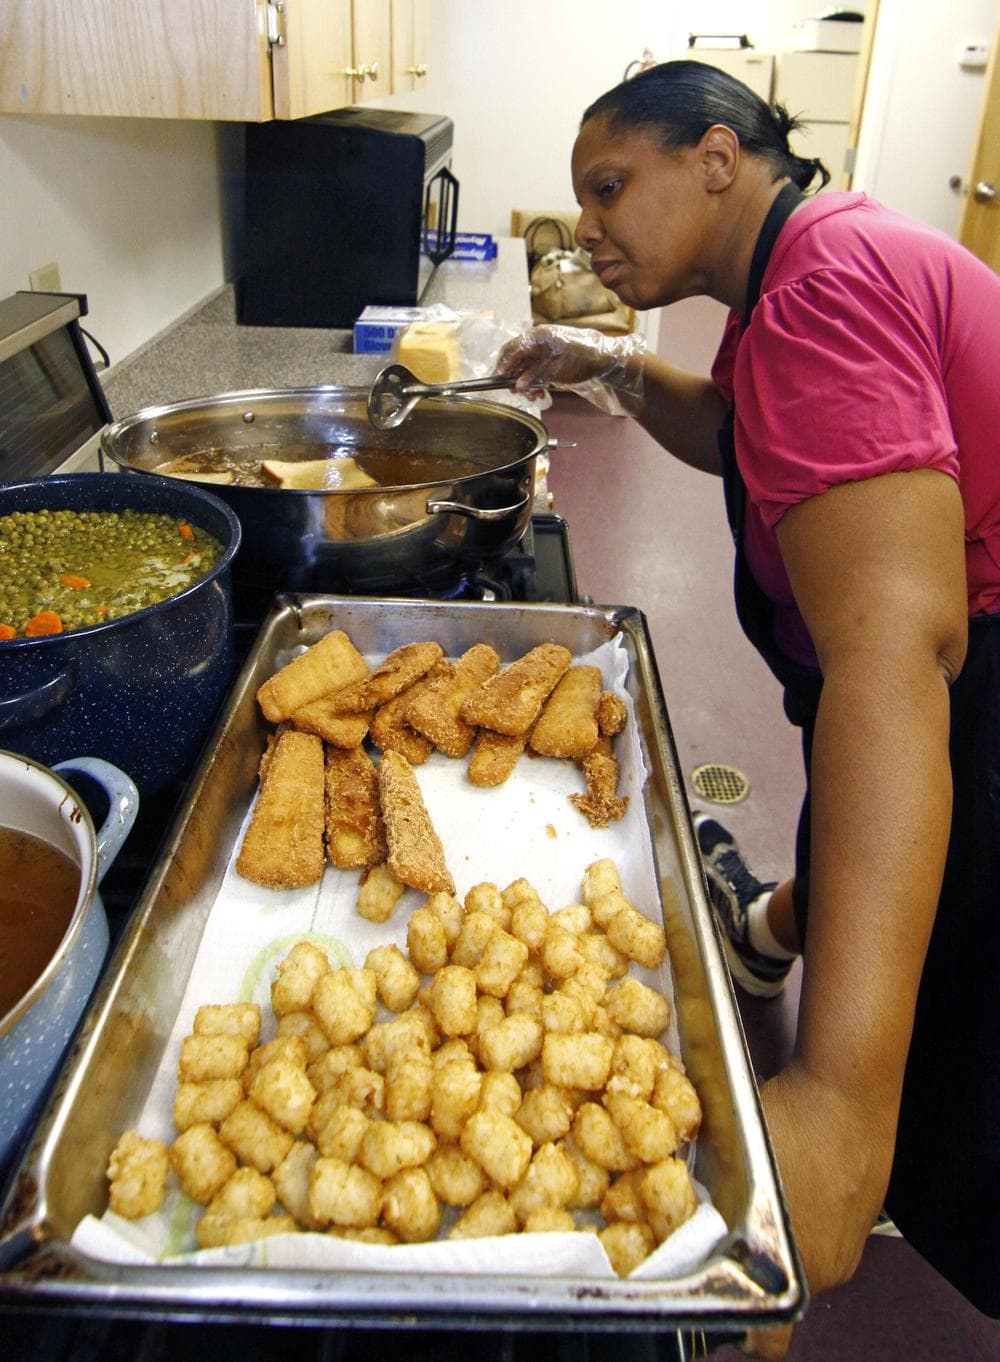 Earnestine Nelson, chief cook for the Alpha and Omega Church's free summer meals program for children and teens, checks the progress of her peas and carrots while frying fish fillets and tater tots for lunch in Jackson, Miss. (AP)